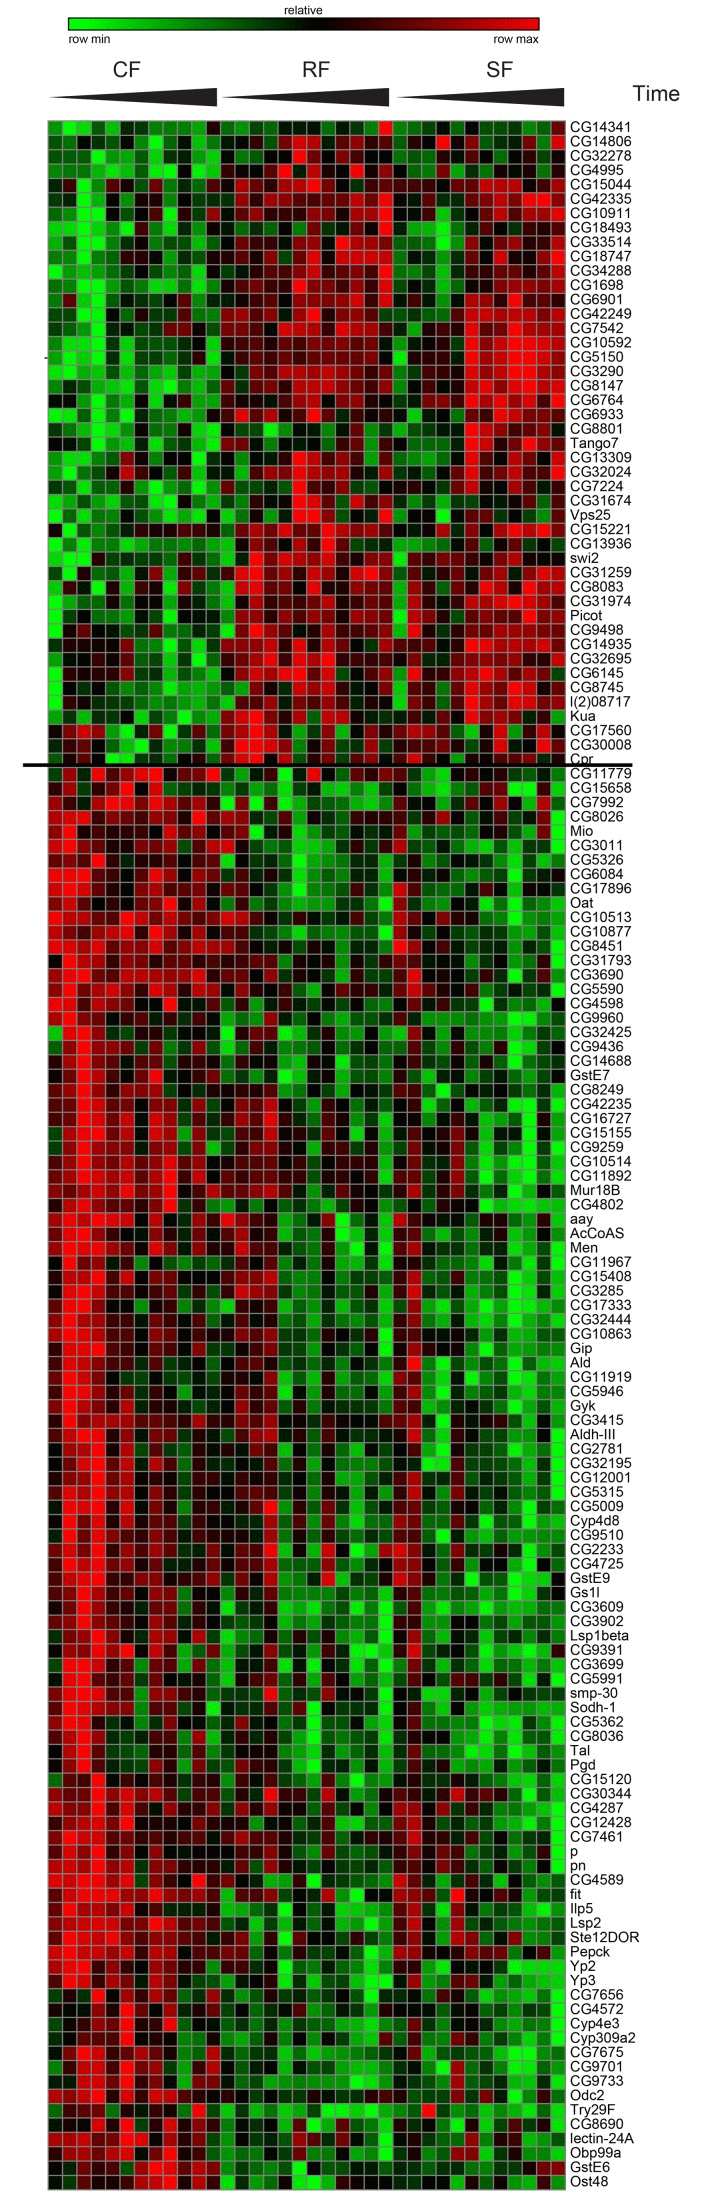 Gene expression of switching genes